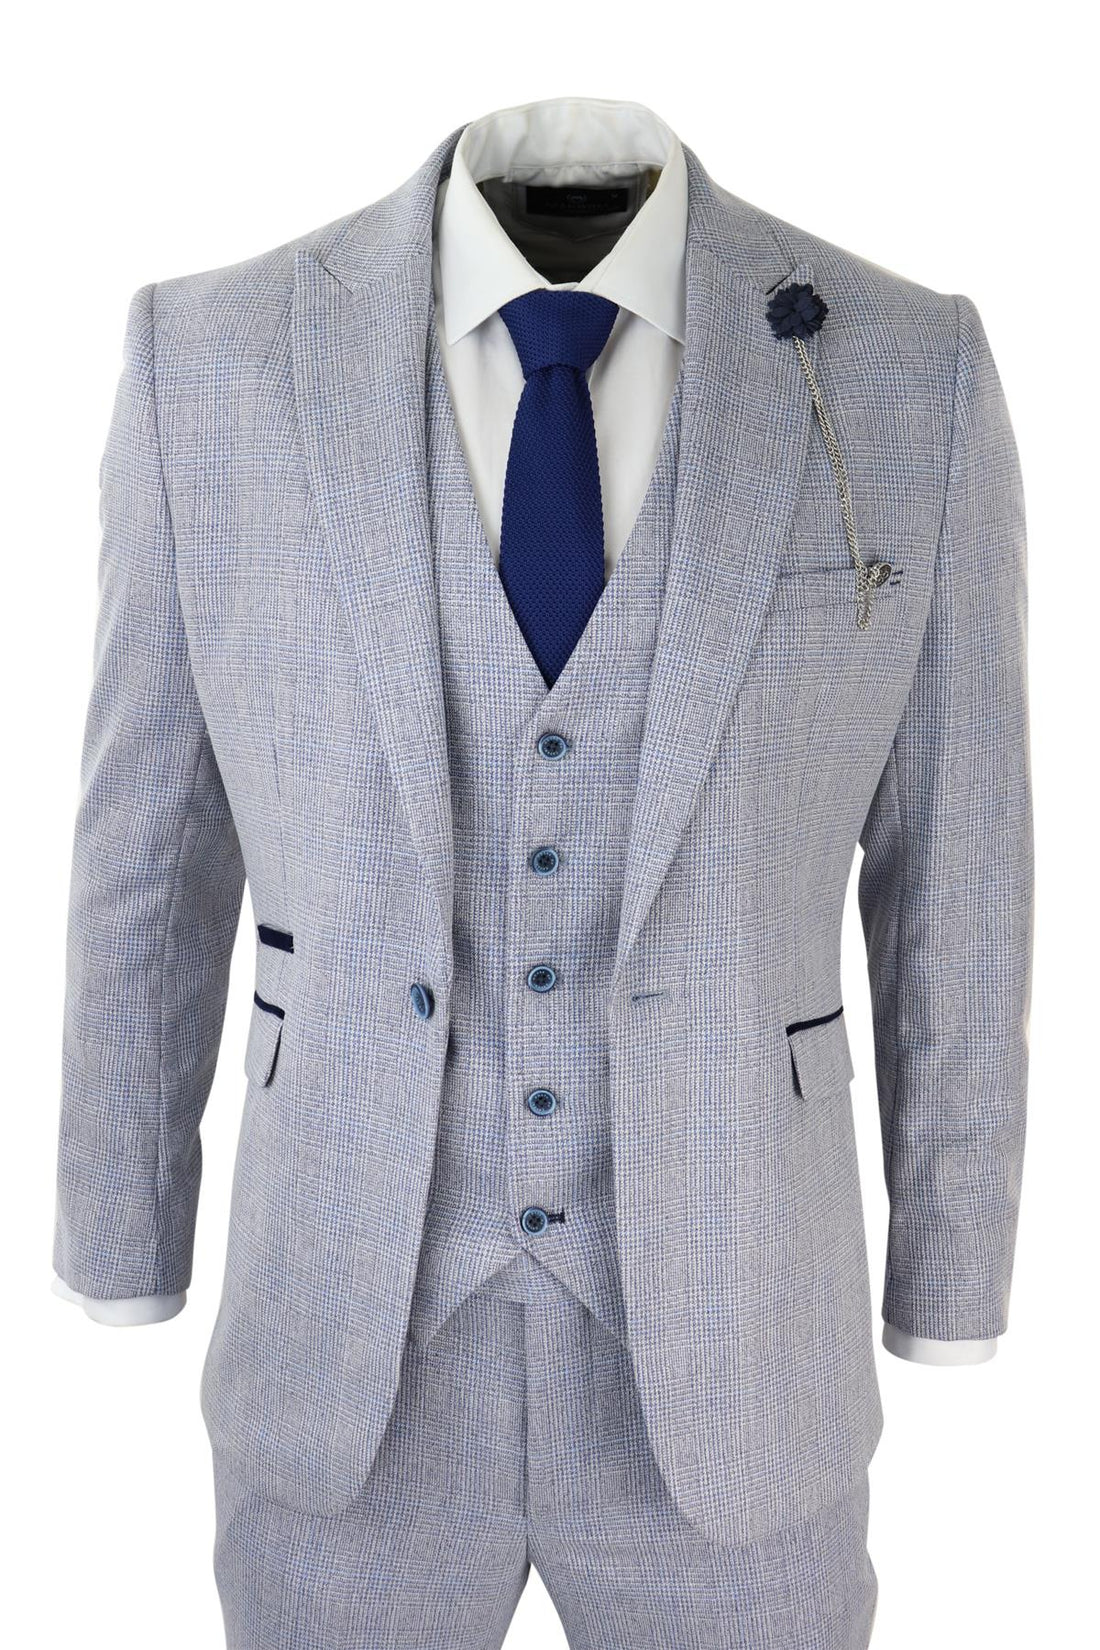 Mens 3 Piece Tweed Suit Light Blue Check Peaky Blinders 1920 Gatsby Wedding Suit - Upperclass Fashions 